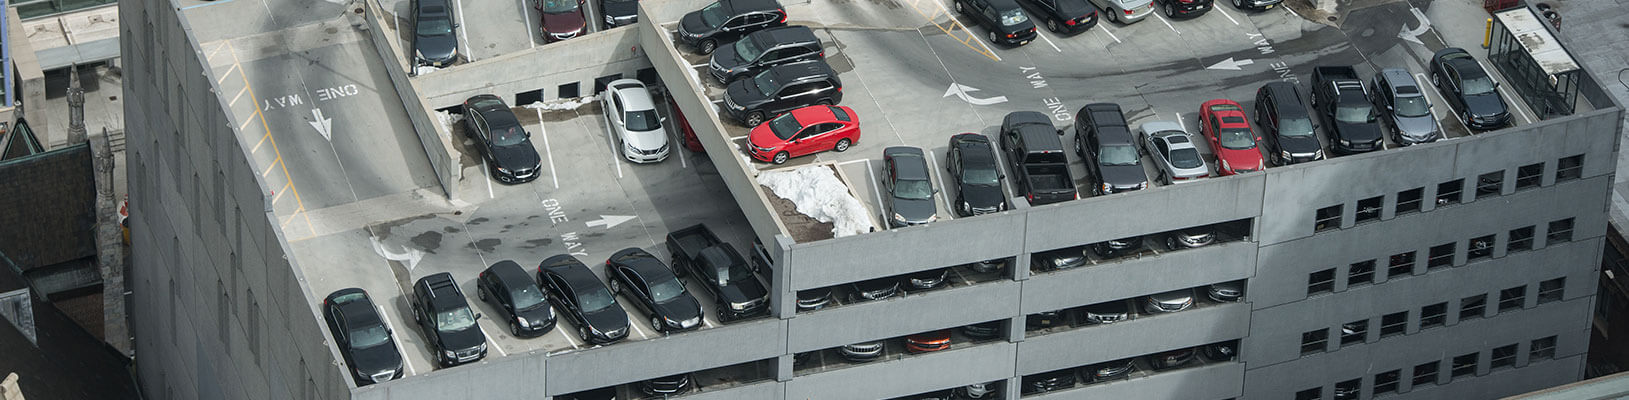 Aerial view of multi-level parking garage with cars parked